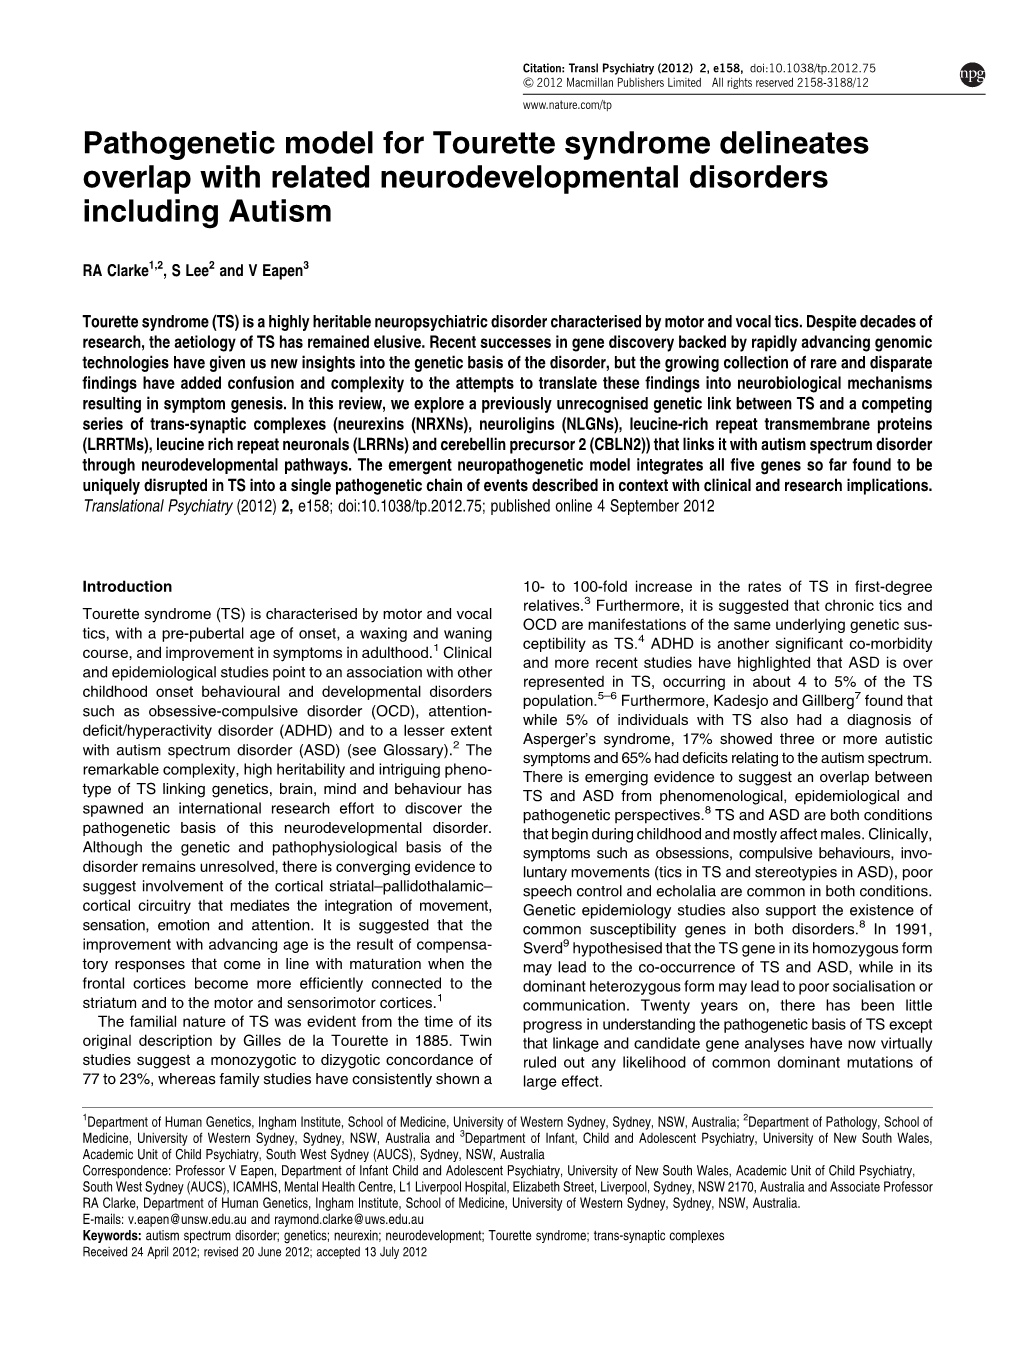 Pathogenetic Model for Tourette Syndrome Delineates Overlap with Related Neurodevelopmental Disorders Including Autism